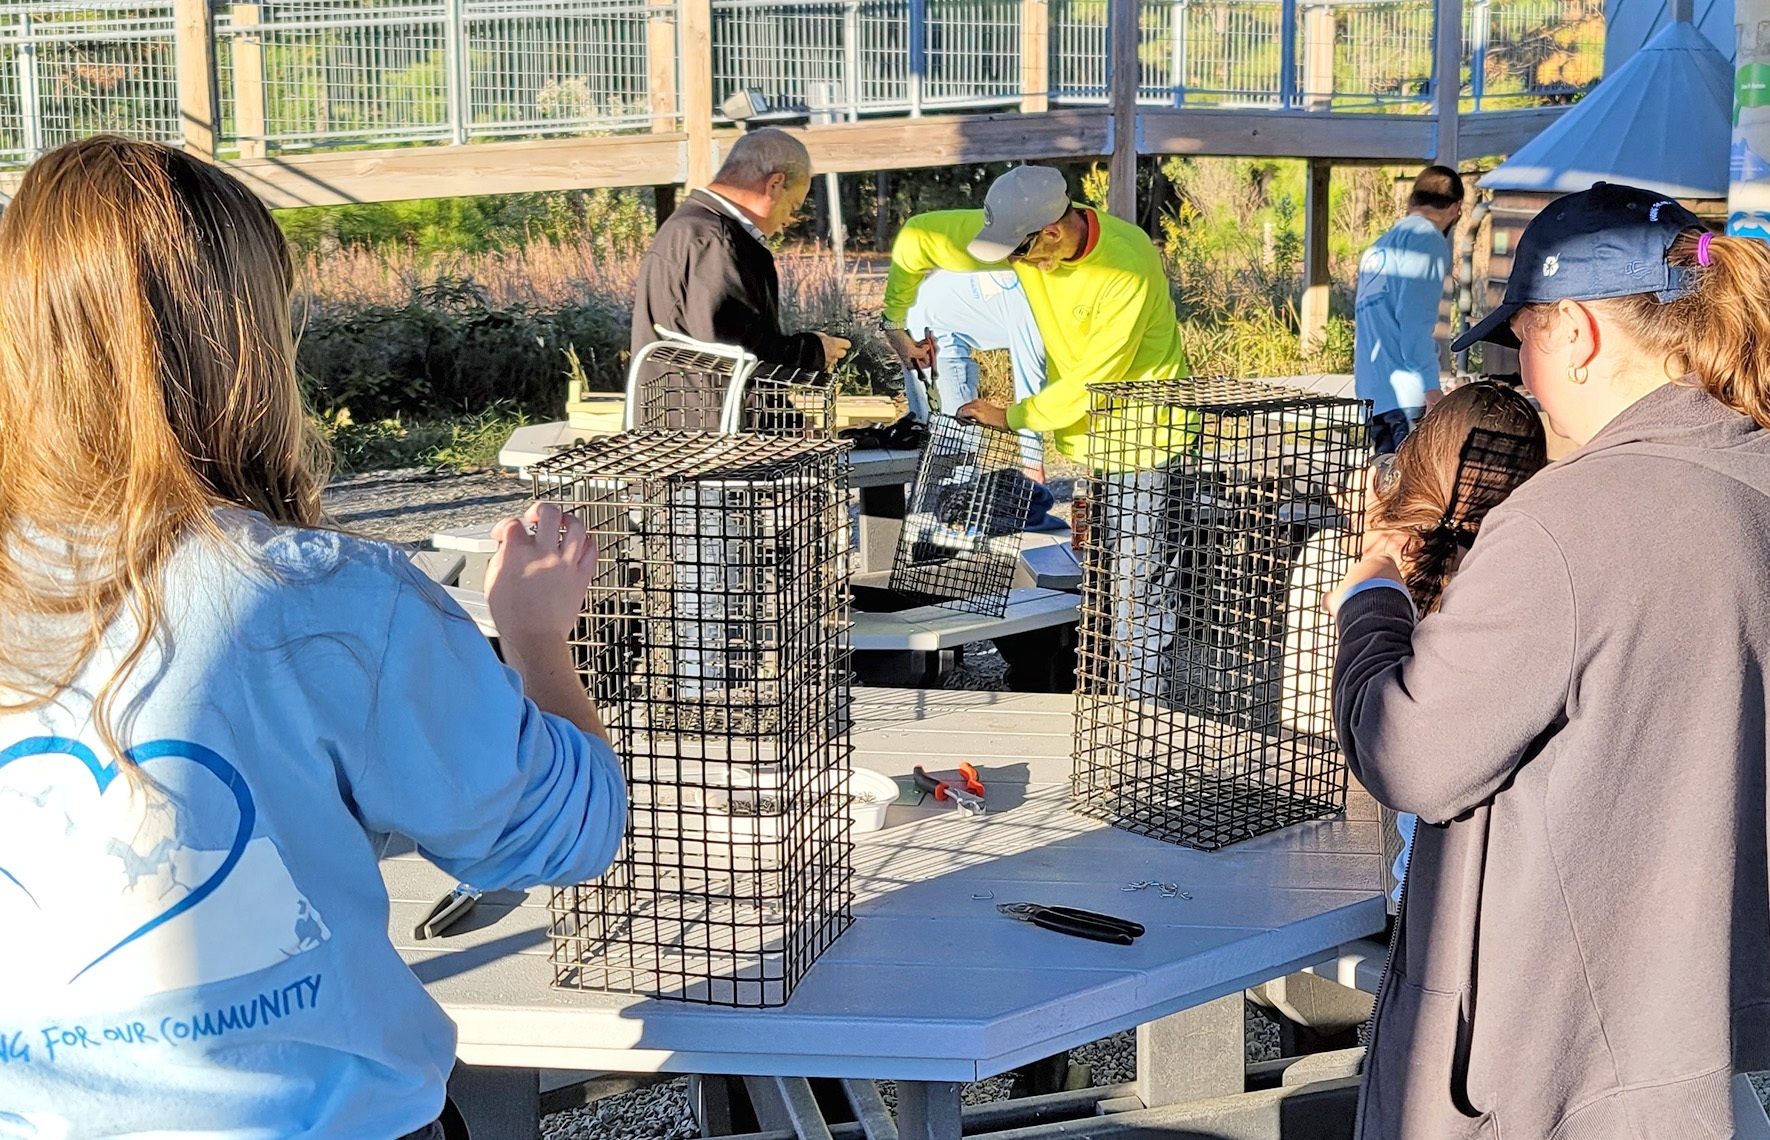 Our team prioritizes caring for our natural resources by participating in activities that focus on protecting waterways and natural resources. Here, our team is building cages to help raise-and-release oysters into the Chesapeake Bay.